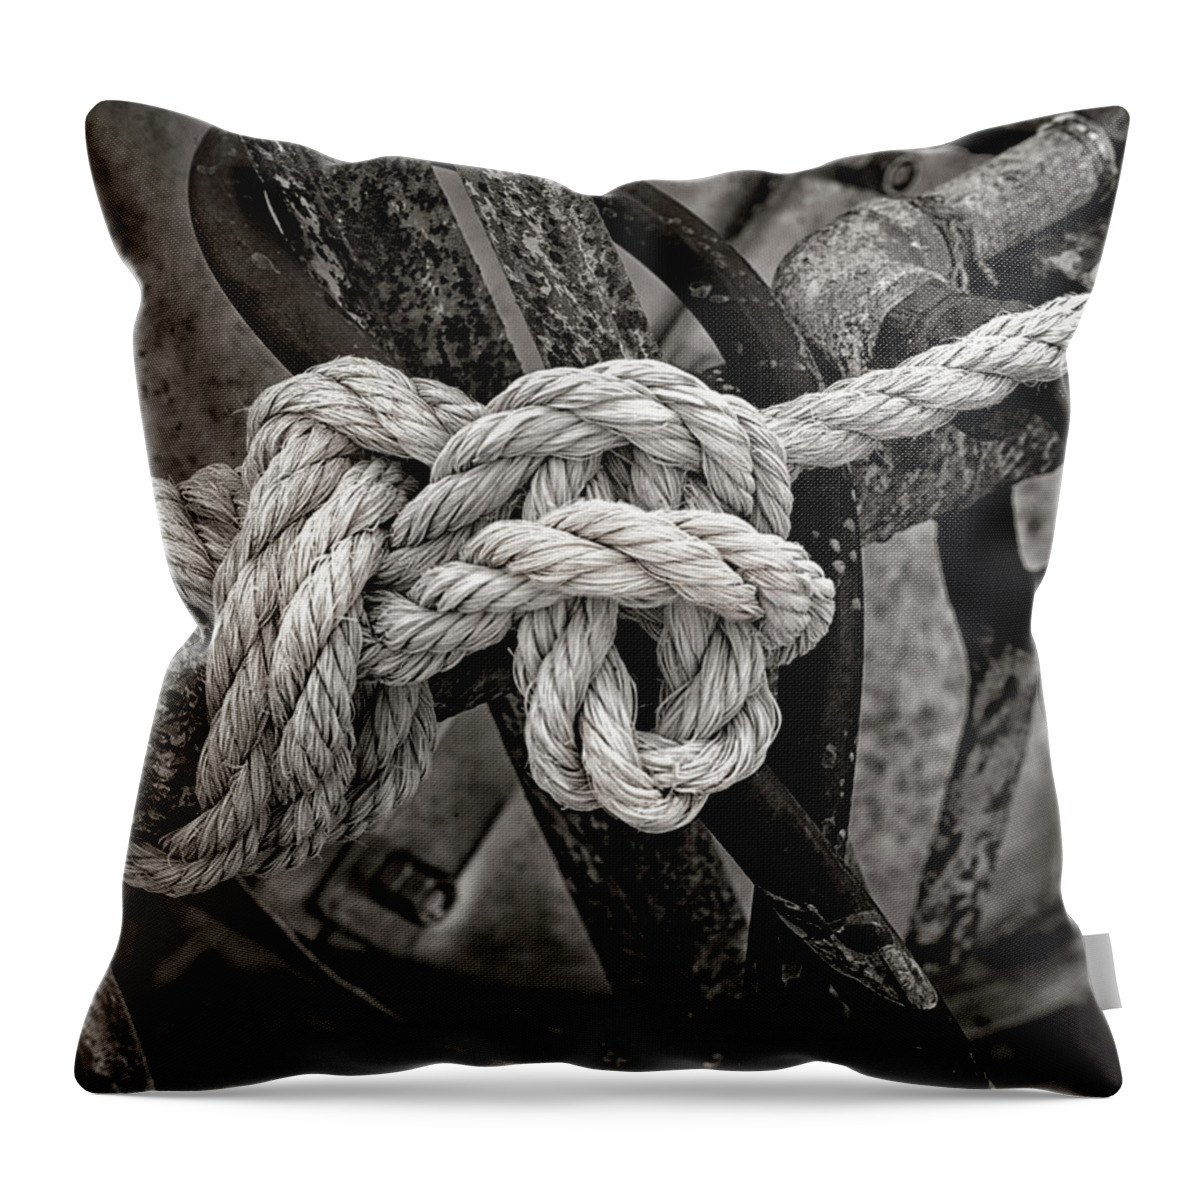 Rope Throw Pillow featuring the photograph Knot Bay Port Michigan by Edward Shotwell